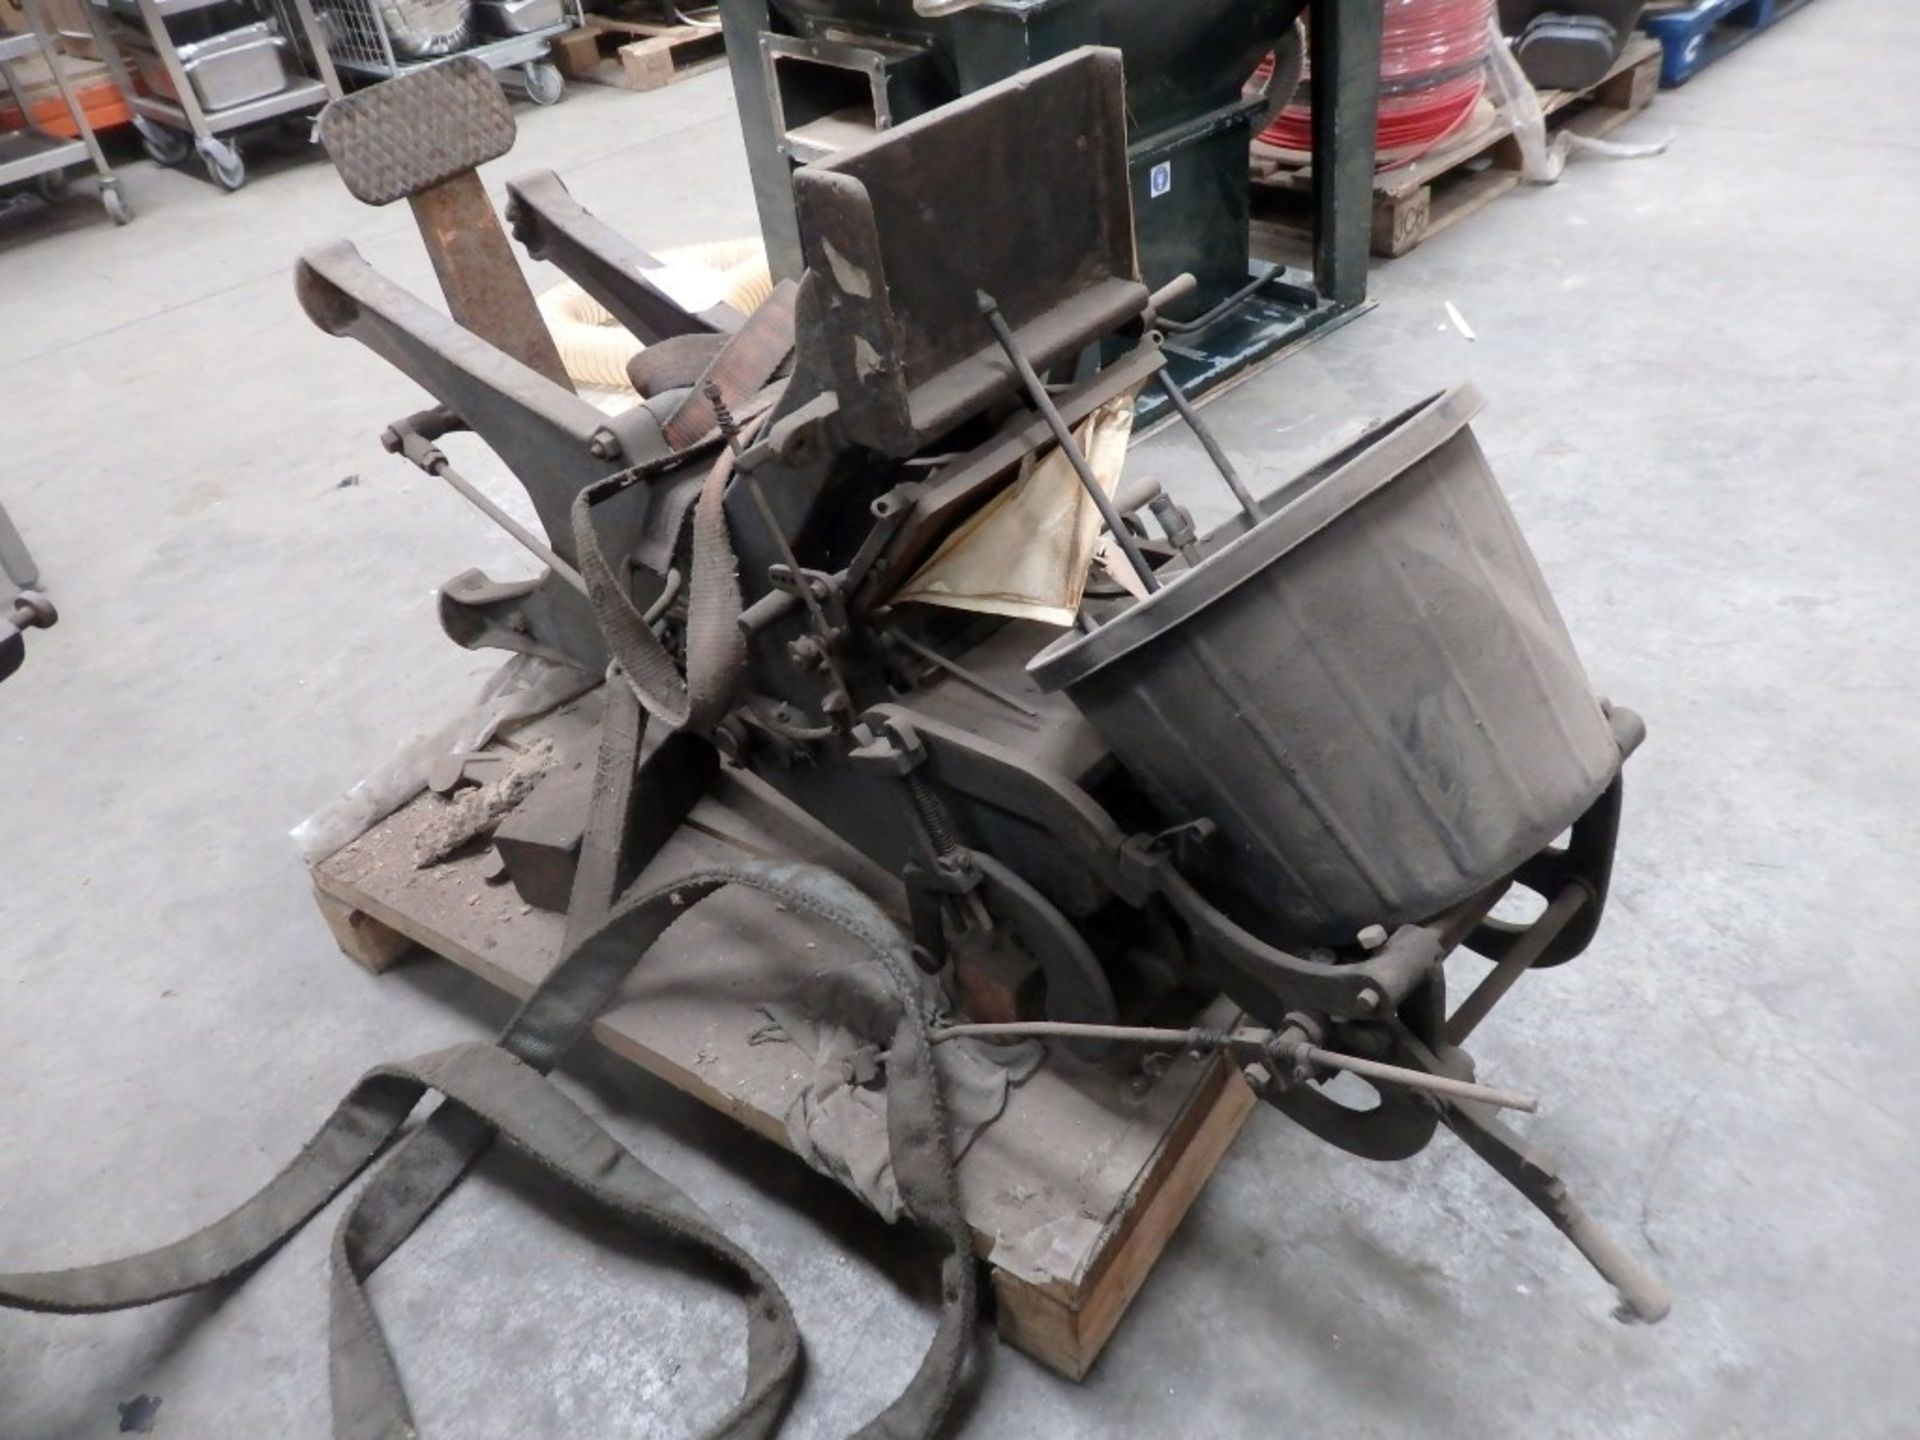 1 x Original Linotype Model 78 Printing Press - Untested In Good Aesthetic Condition - Fantastic - Image 2 of 23